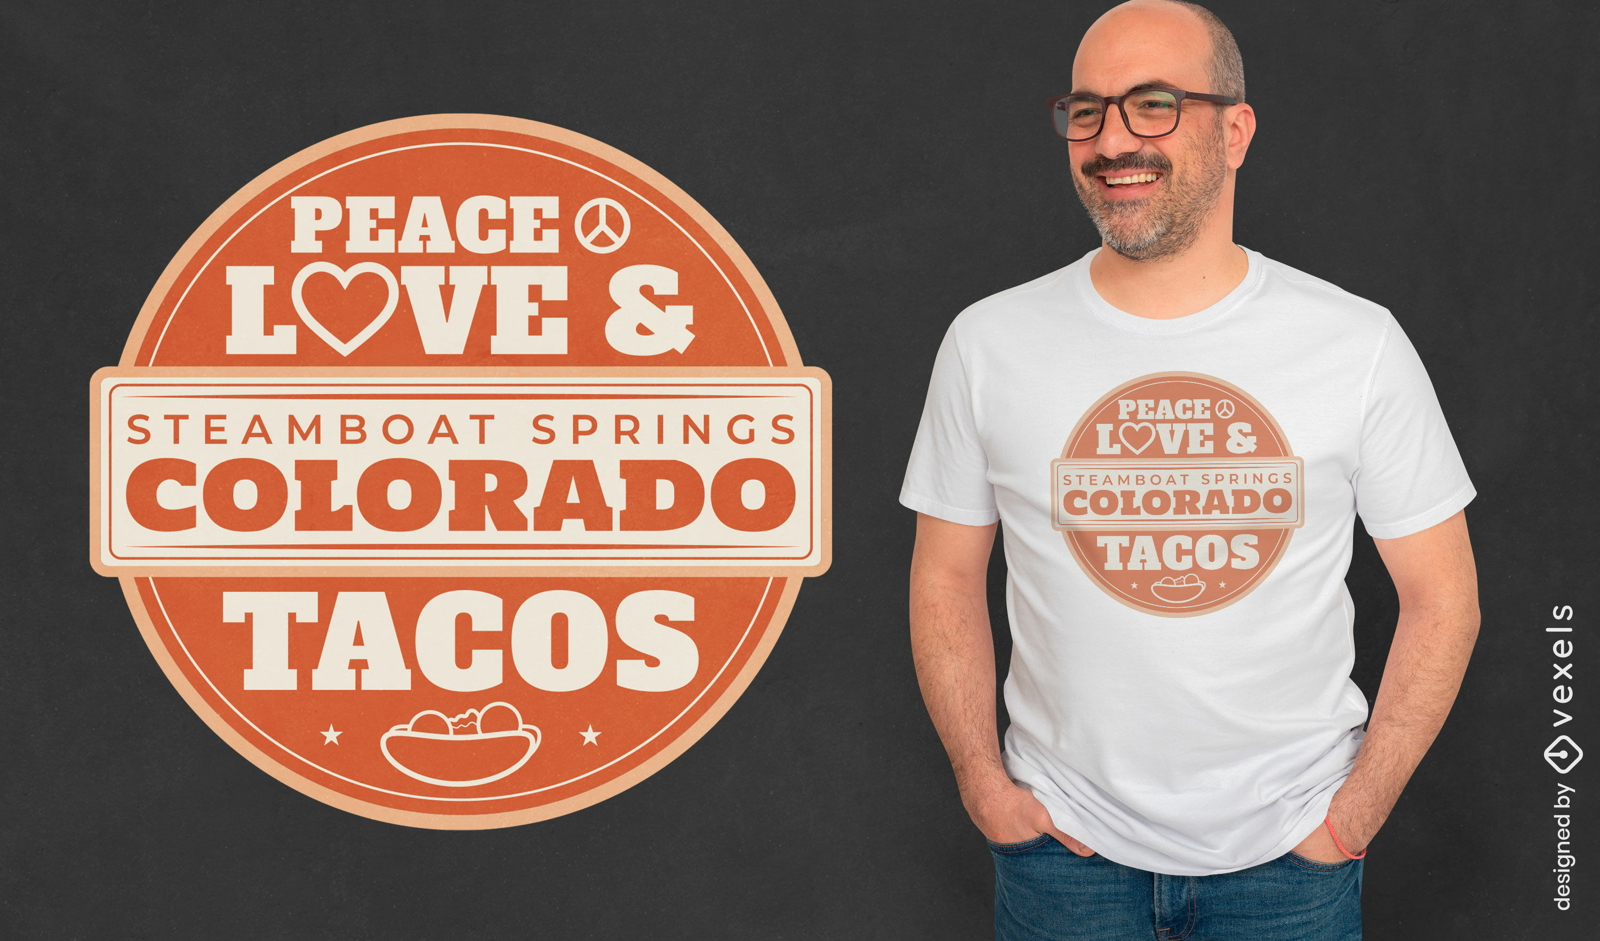 Peace love and tacos badge t-shirt design